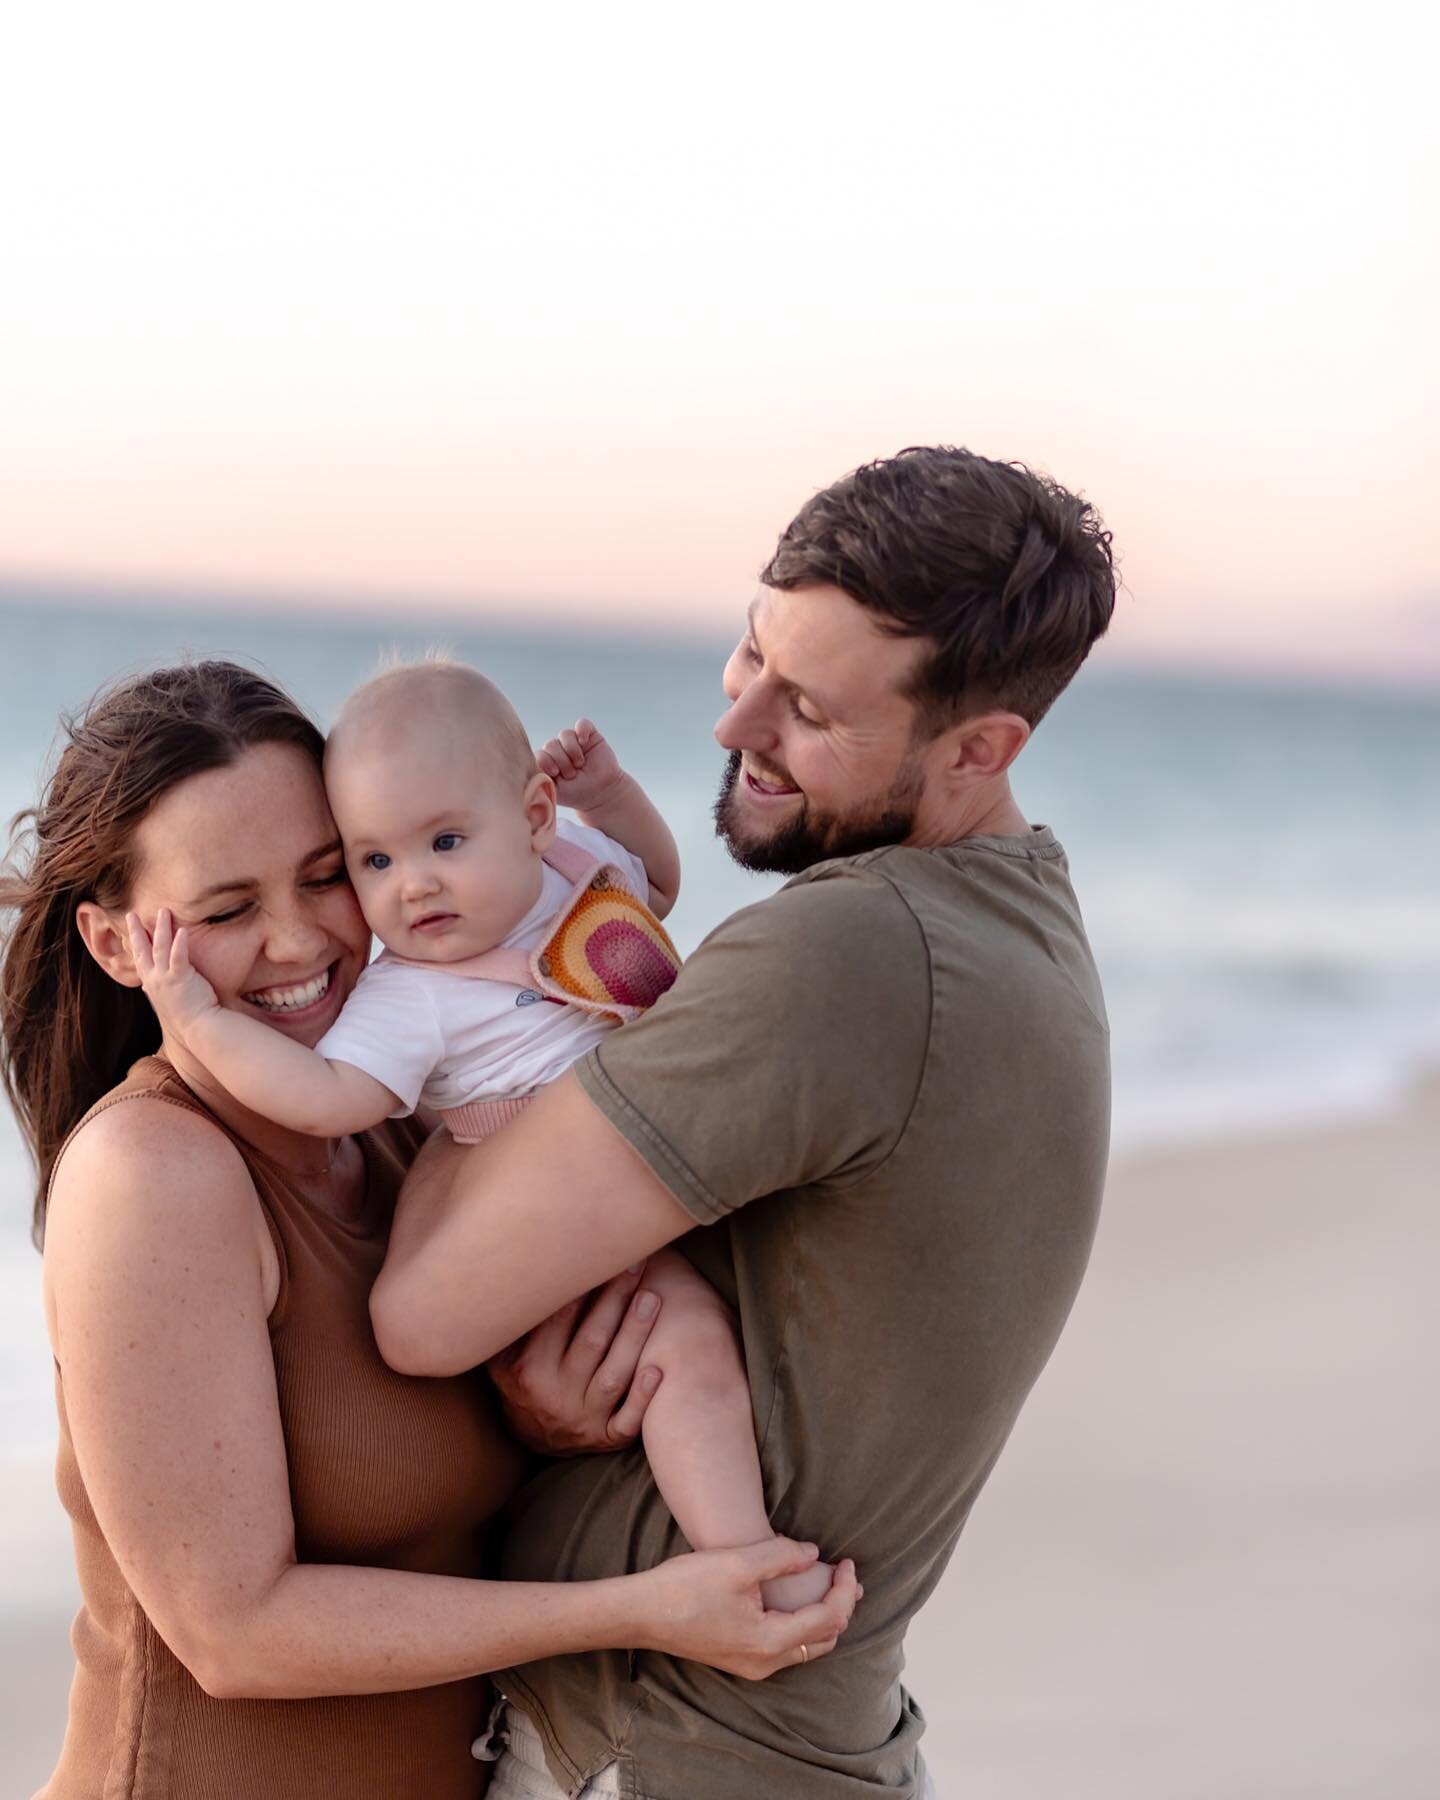 Capturing moments of joy, laughter, and connection, one frame at a time. Family memories in the making ☀️💕#PerthFamilyPhotography #FamilyMomentsPerth #BeachFamilyShoot #PerthLife #FamilyFun #PerthBeachDays #FamilyLove #PerthPhotographer #FamilyPortr